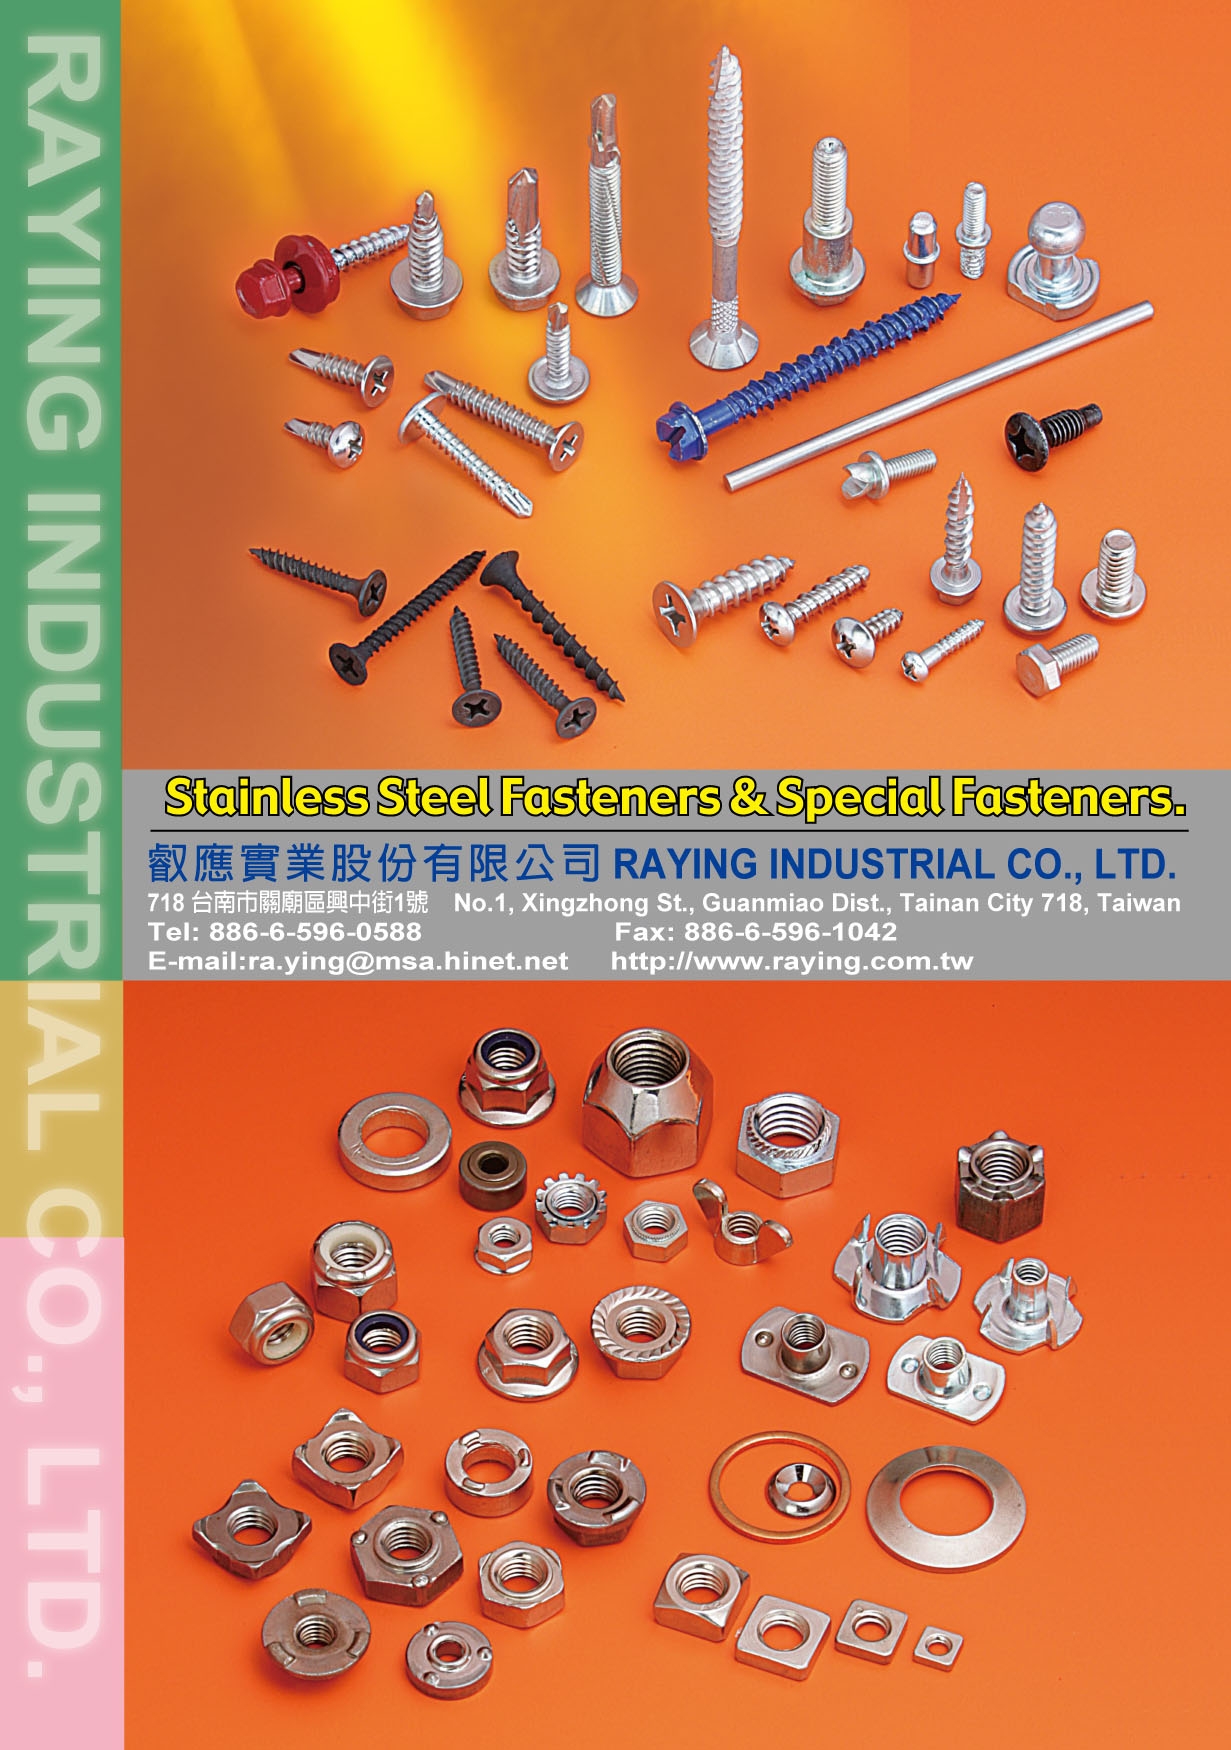 RAYING INDUSTRIAL CO., LTD.  Online Catalogues